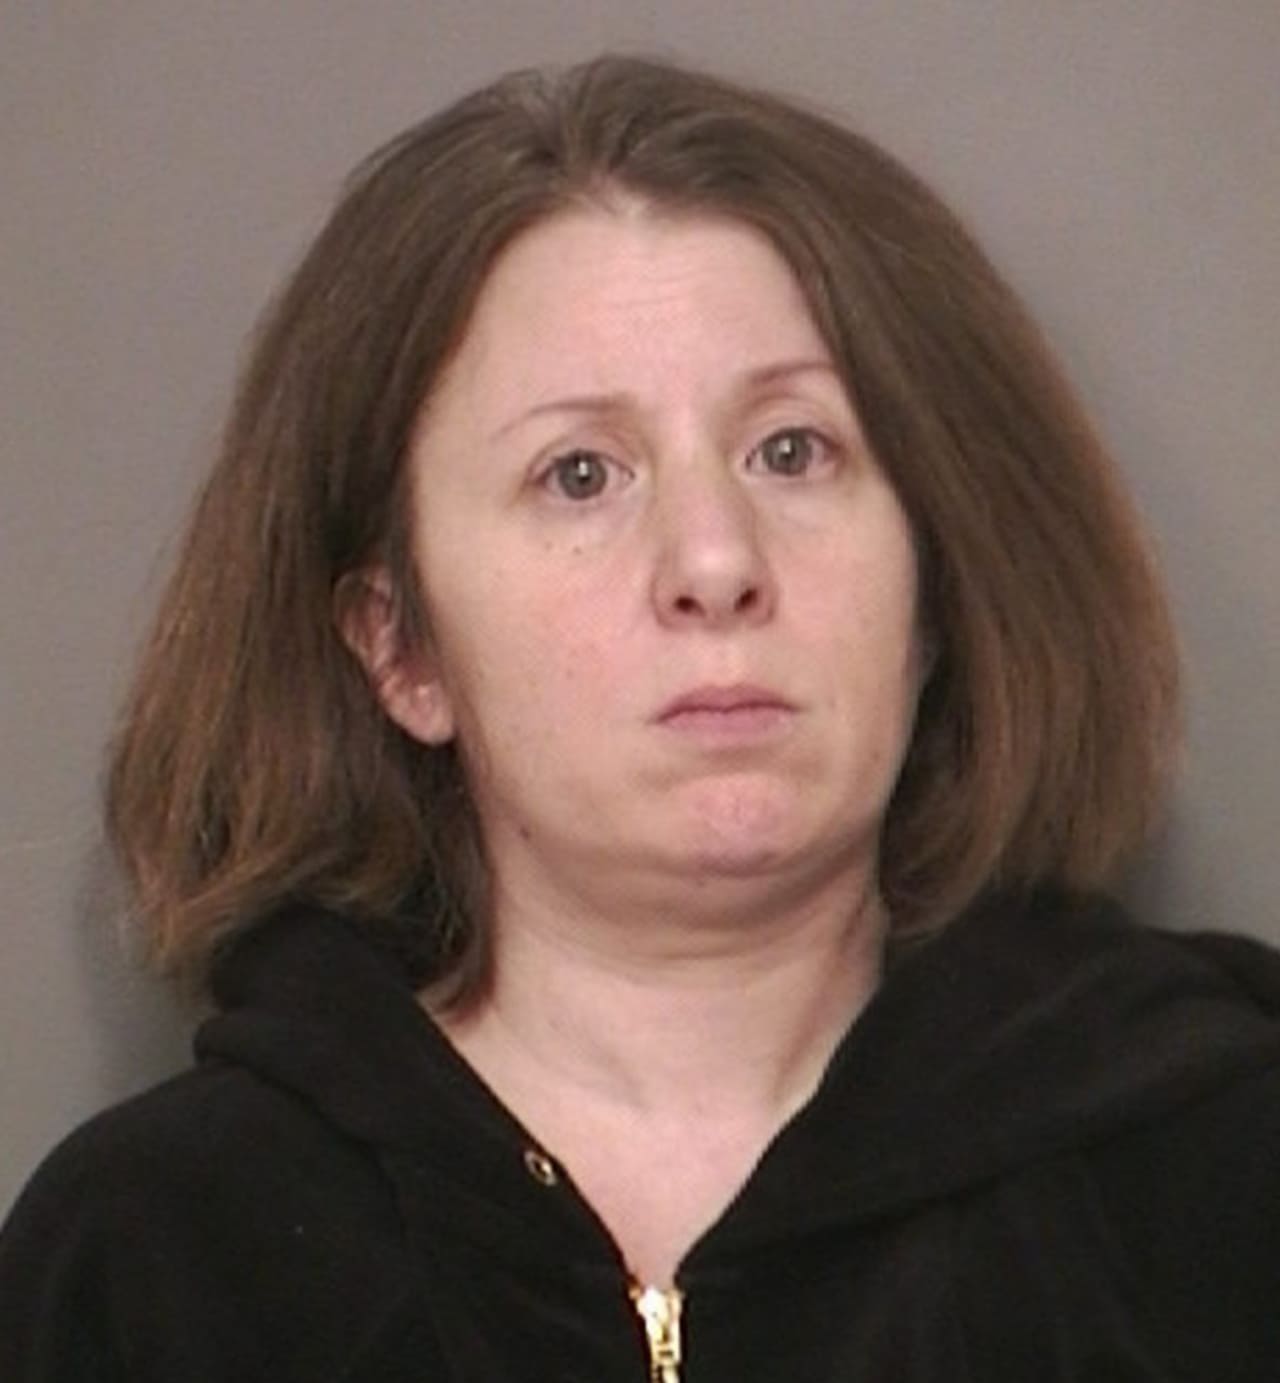 Aimee Stark, also known as Aimee Forman, 41, of Mount Kisco was sentenced for stealing the identities of two teachers in order to keep working.